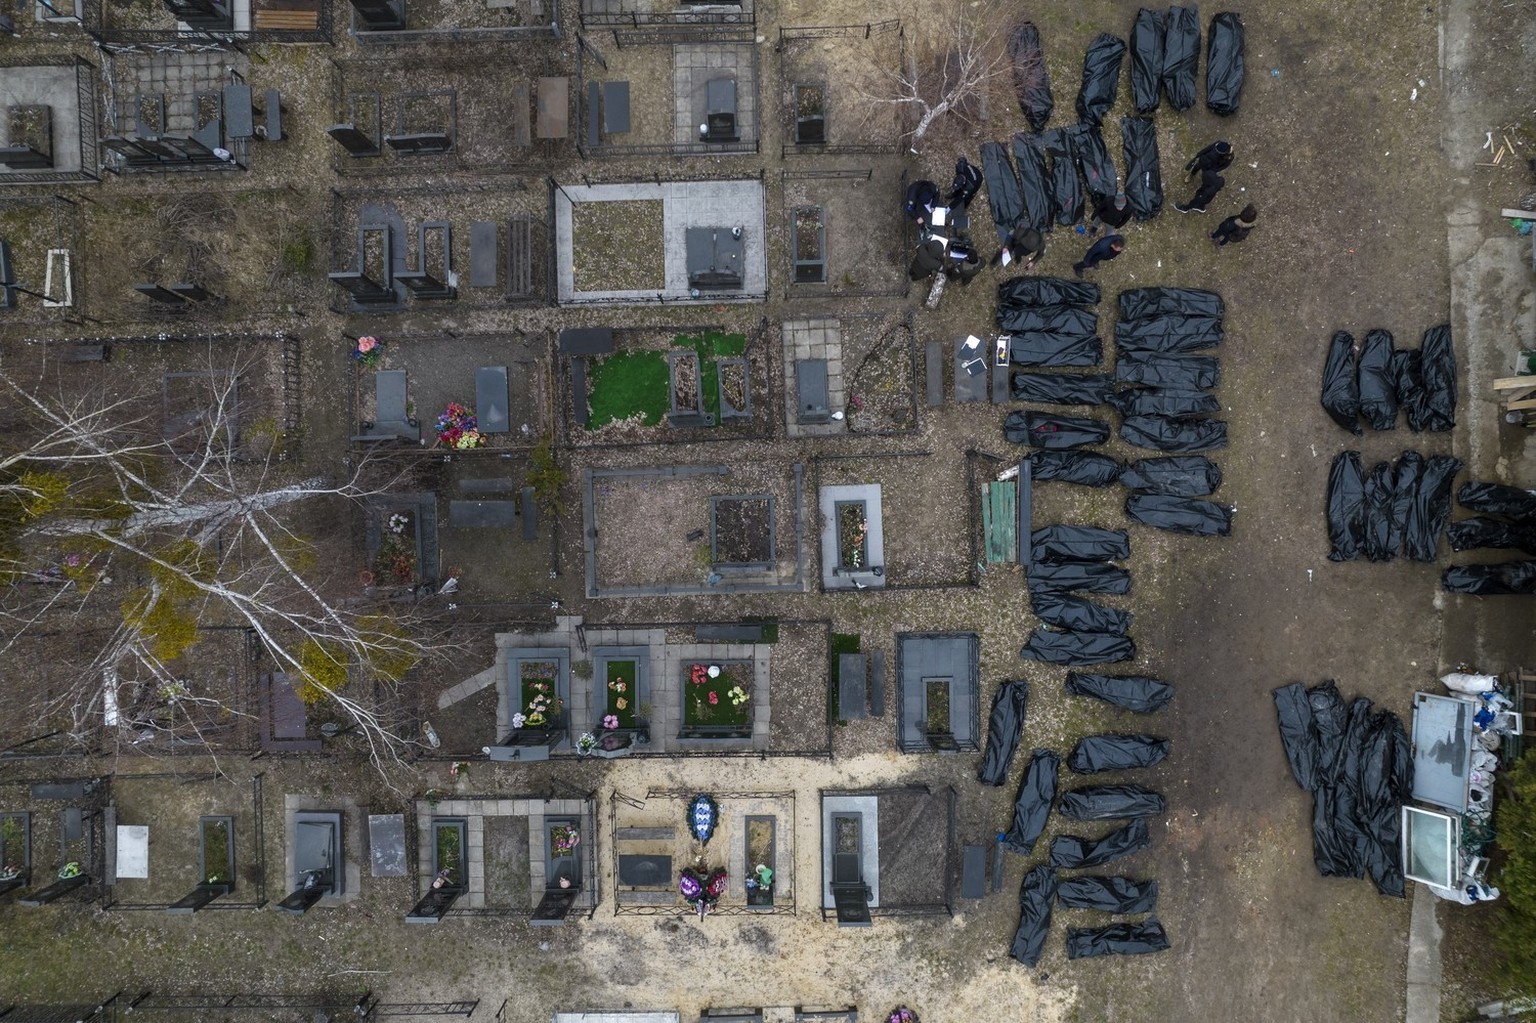 Police work to identify civilians who were killed during the Russian occupation in Bucha, Ukraine, on the outskirts of Kyiv, before sending the bodies to the morgue, Wednesday, April 6, 2022. (AP Phot ...